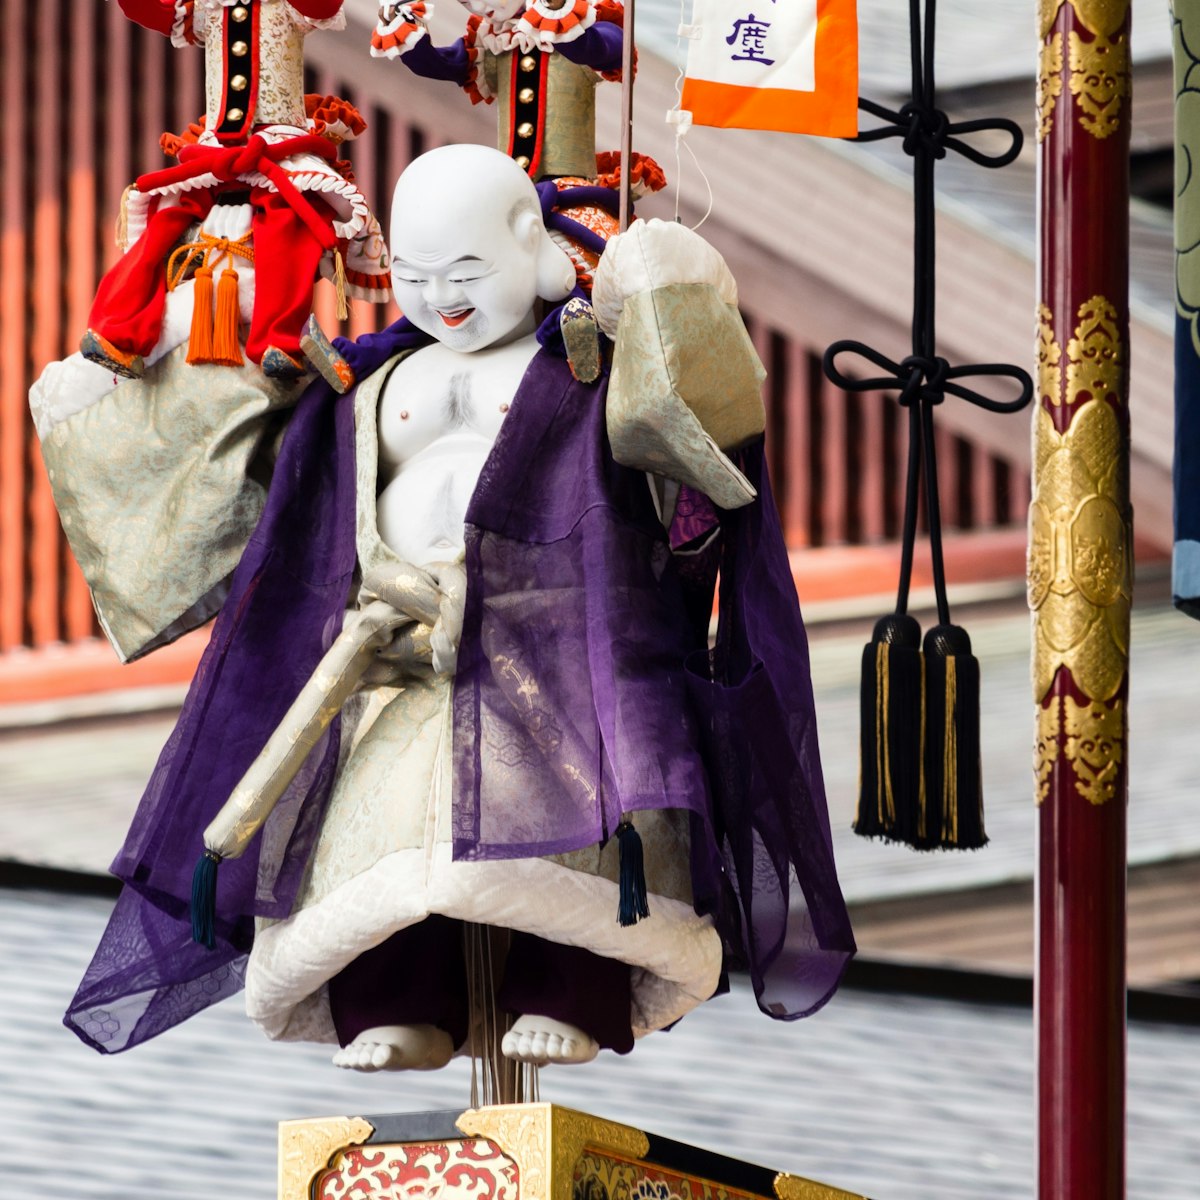 Takayama, Japan - October 9, 2015: Wooden puppets on top of Hotei decorated float during annual Takayama Autumn Festival; Shutterstock ID 602701325; Your name (First / Last): Laura Crawford; GL account no.: 65050; Netsuite department name: Online Editorial; Full Product or Project name including edition: BiA images Yokohama, Takayama, Kamakura